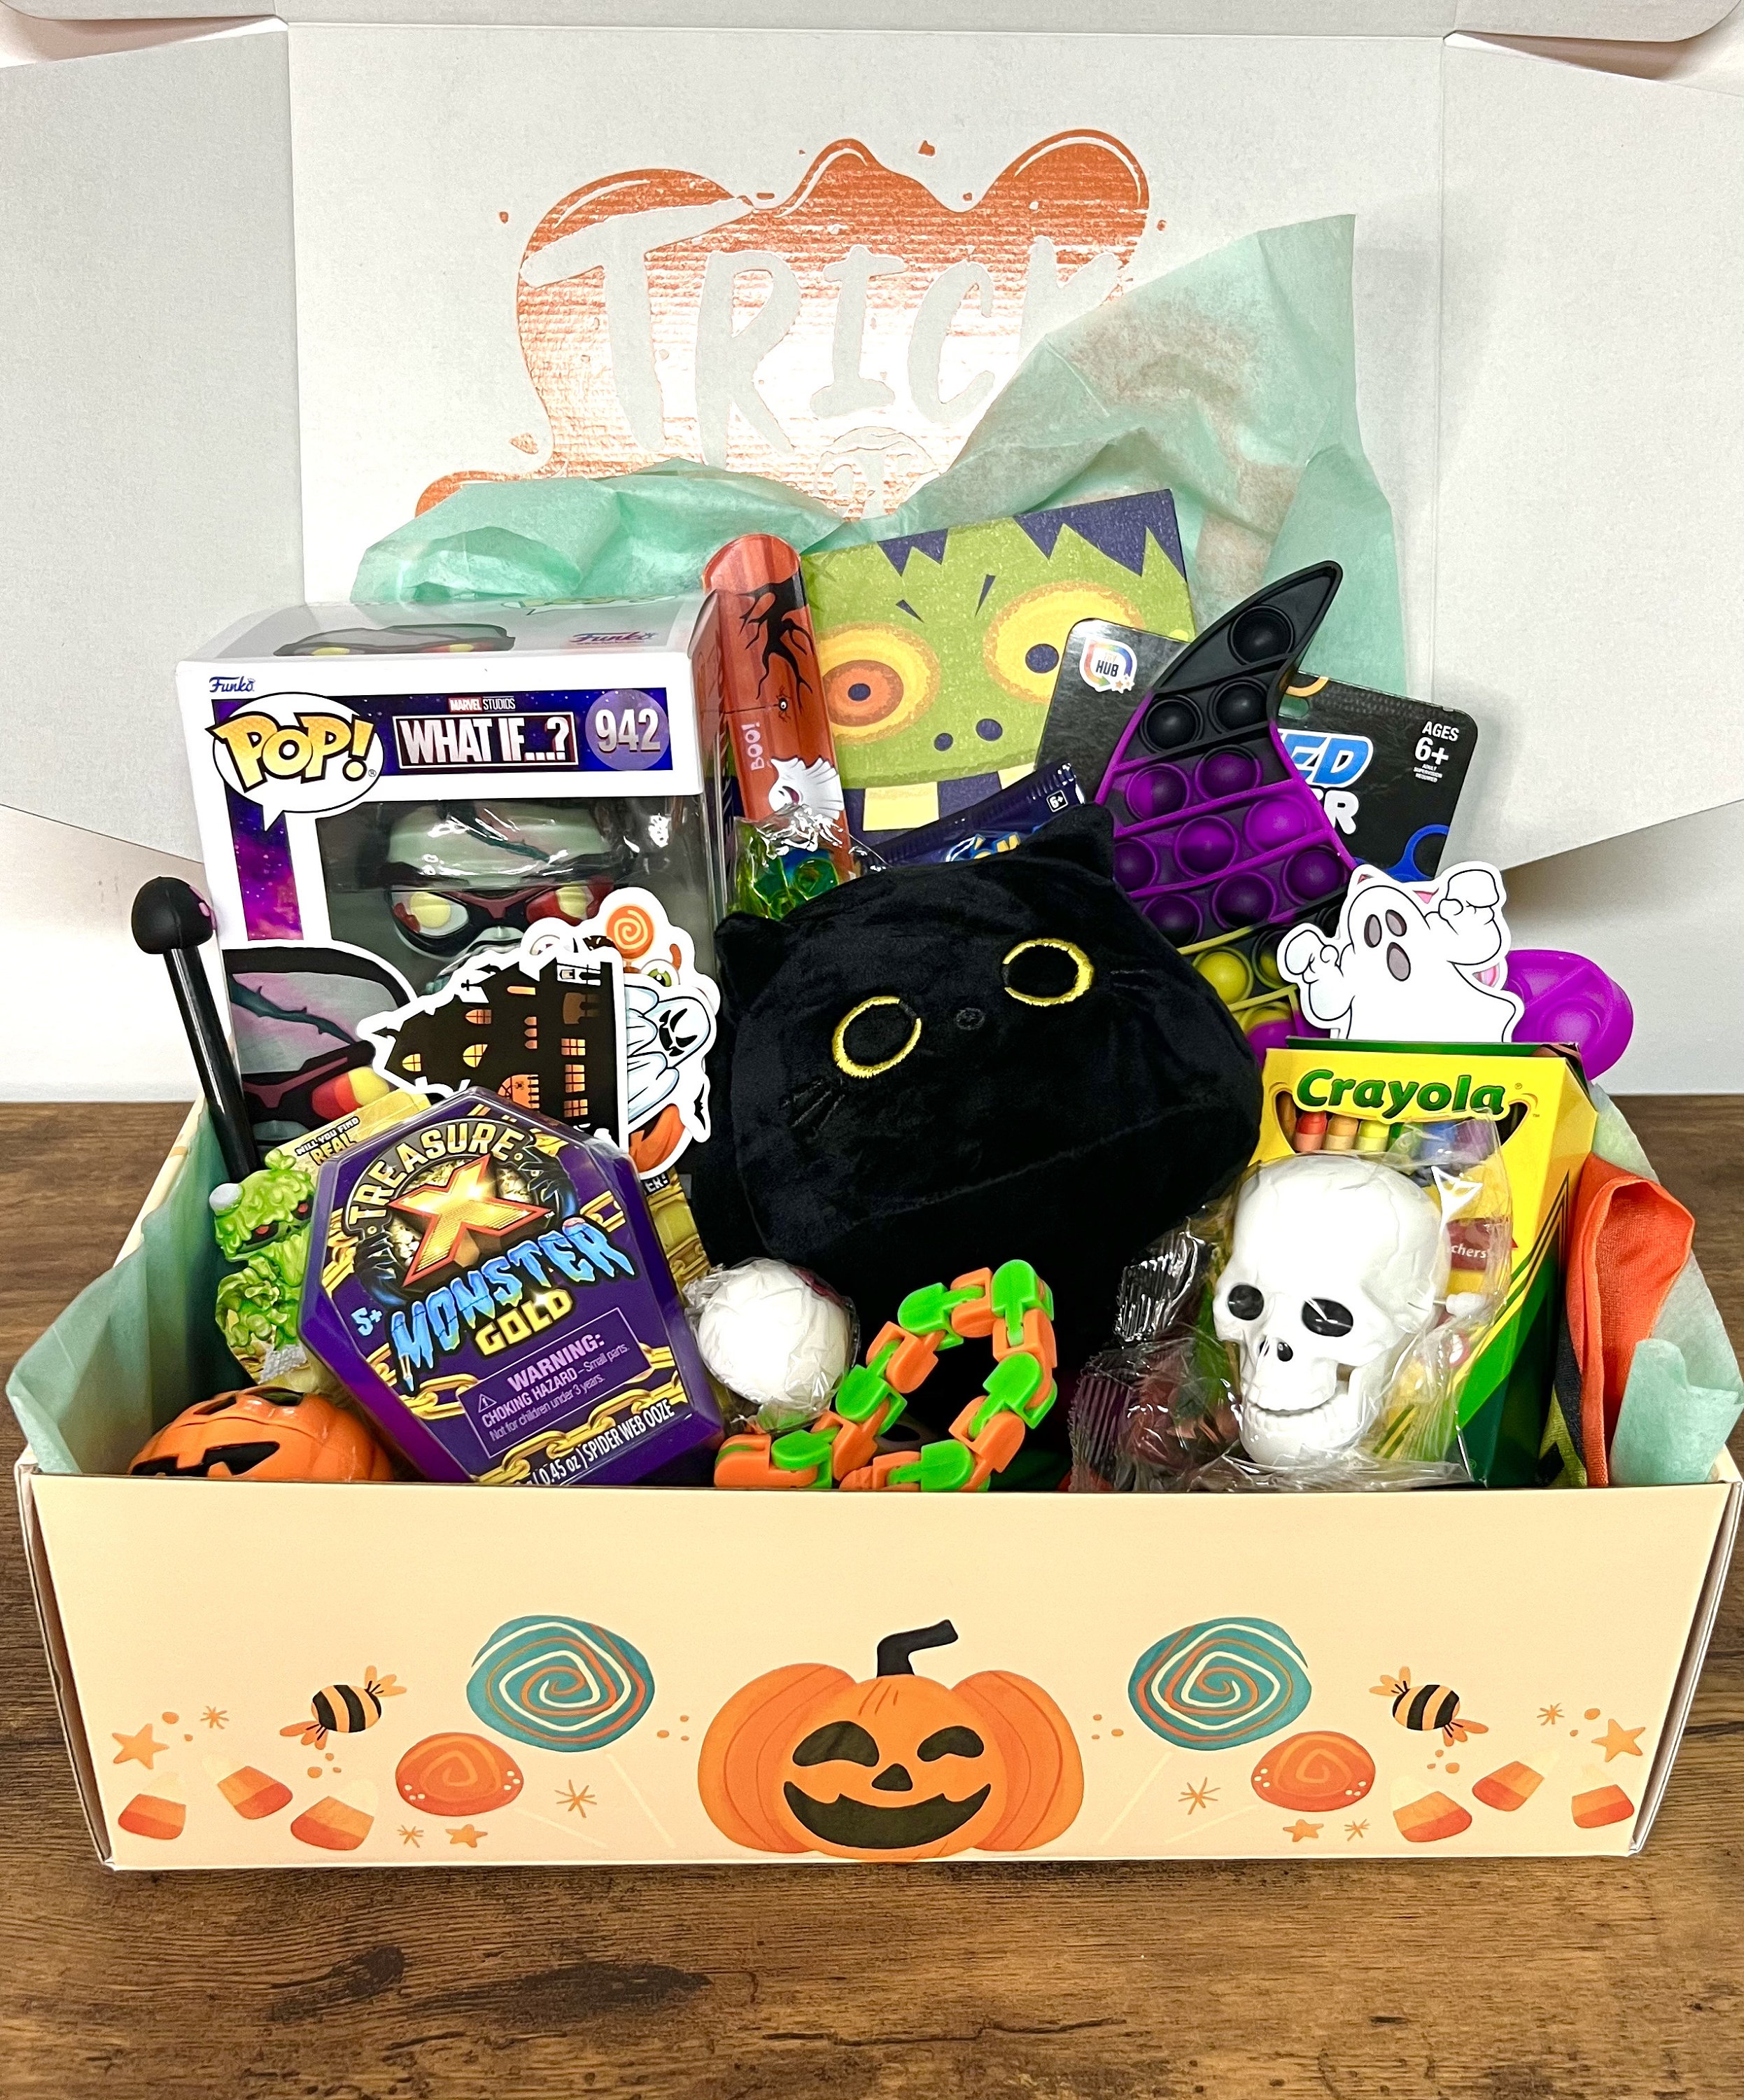 NEW* HALLOWEEN PETS - STAR REWARDS And PRESENTS Coming To Adopt Me